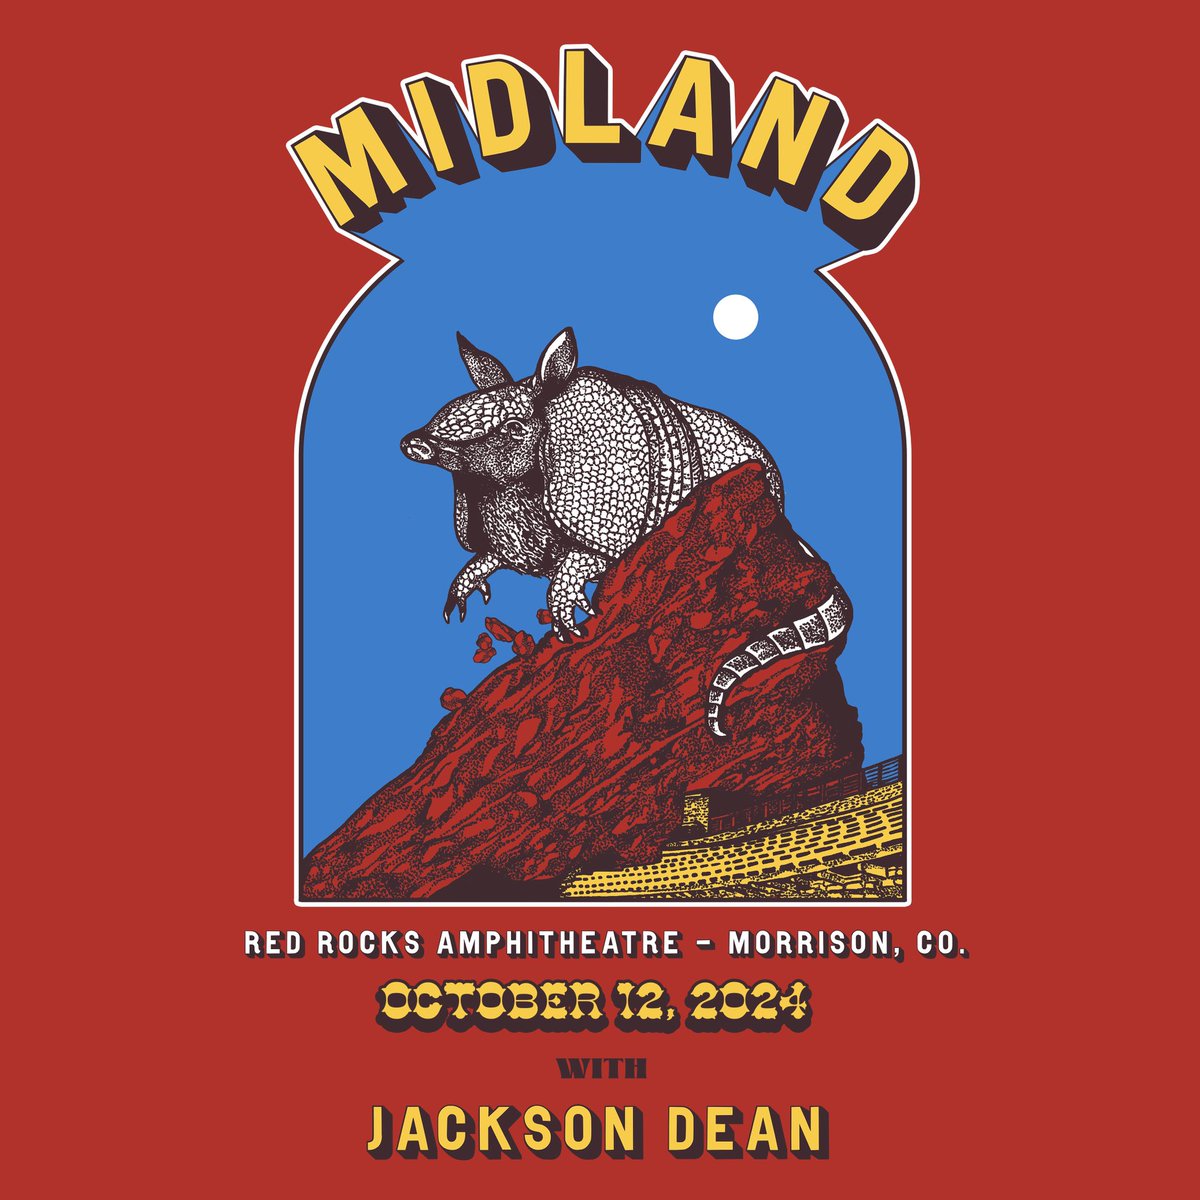 ON SALE NOW! Catch Jackson Dean at @RedRocksCO in Morrison, CO on Saturday, October 12th with @MidlandOfficial. Get your tickets now at jacksondeanmusic.com/tour